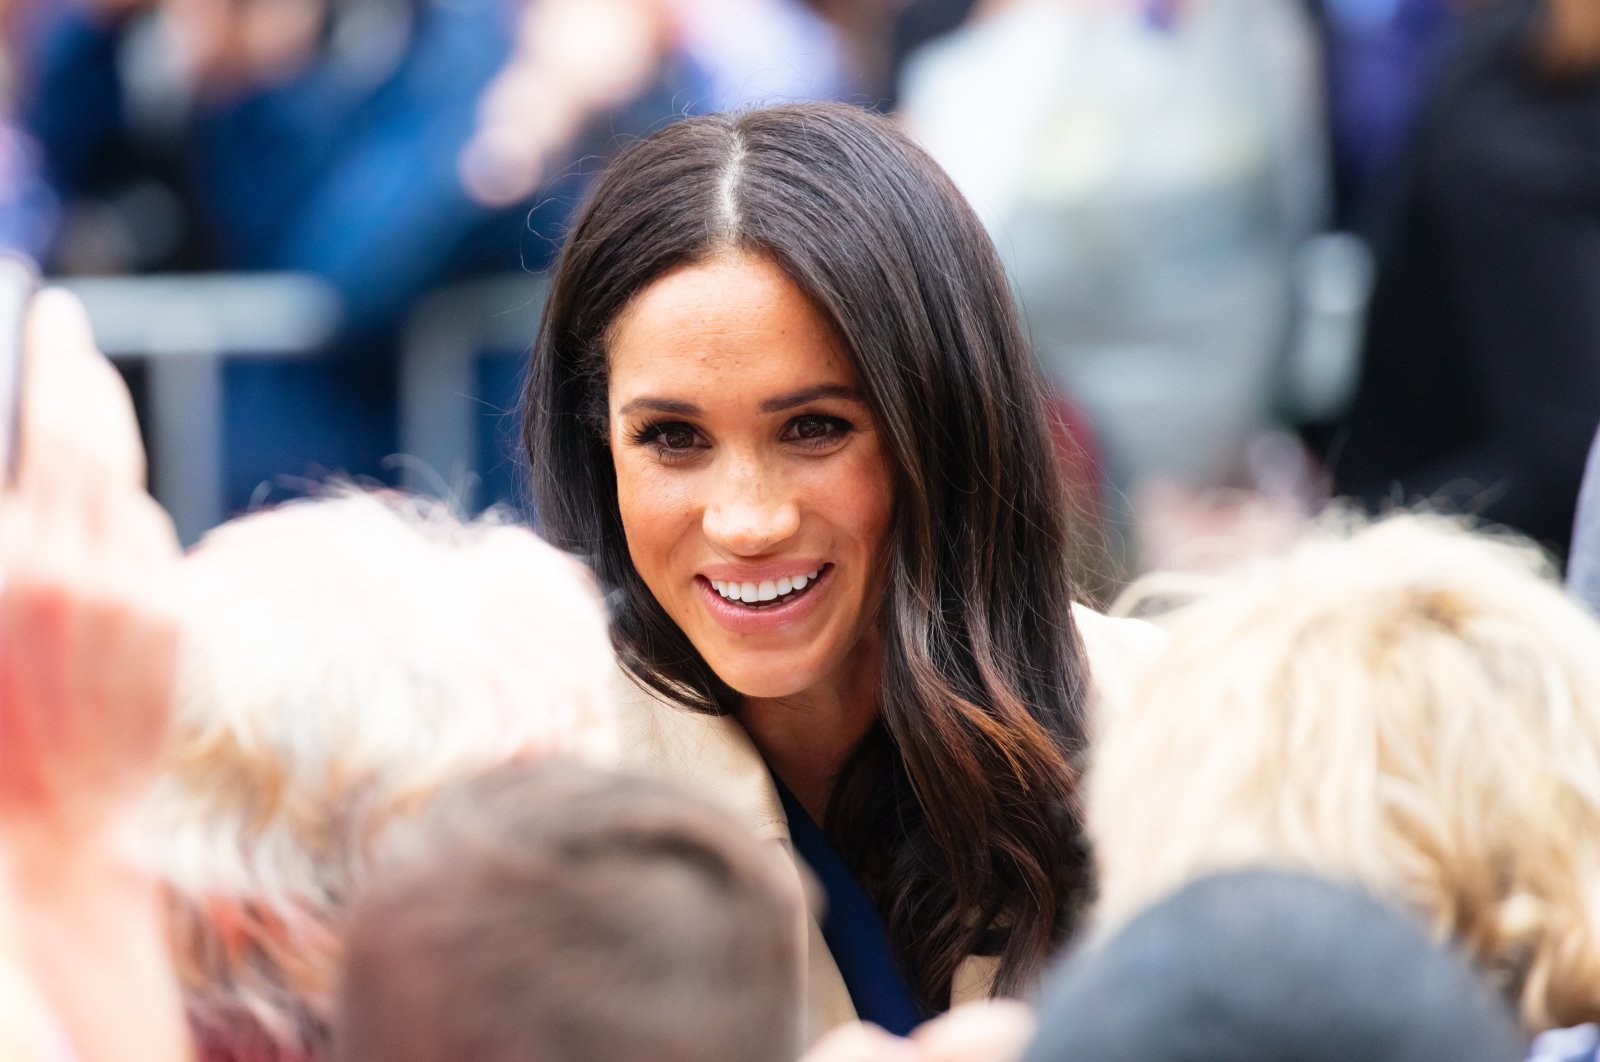 Meghan Markle, Duchess of Sussex, meets fans at Government House in Melbourne, Australia. Oct, 18, 2018. (Shutterstock Photo)